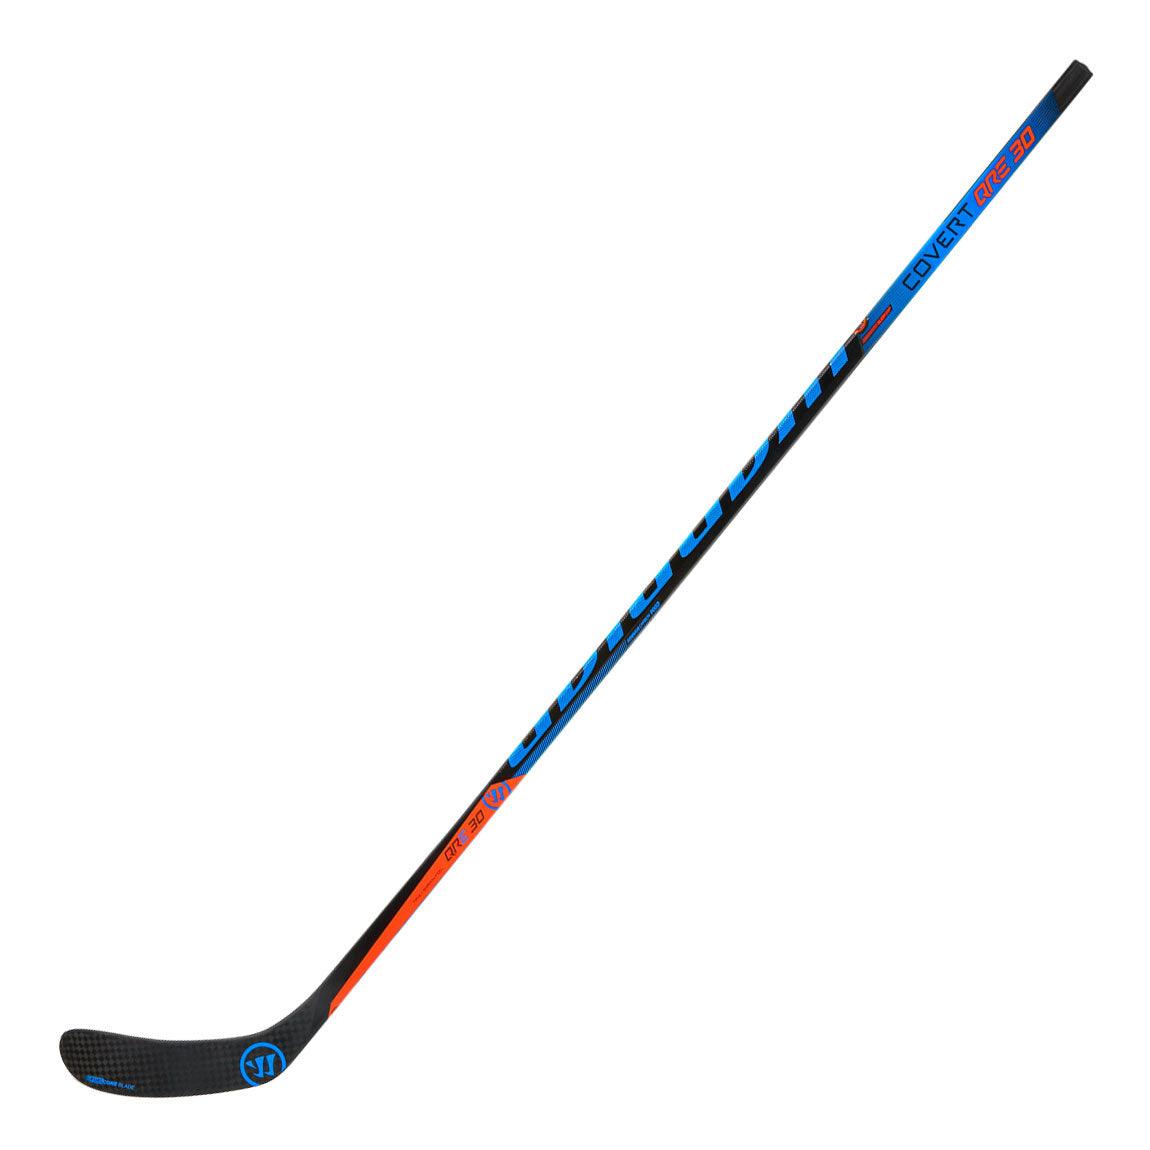 Covert QRE 30 Hockey Stick - Intermediate - Sports Excellence